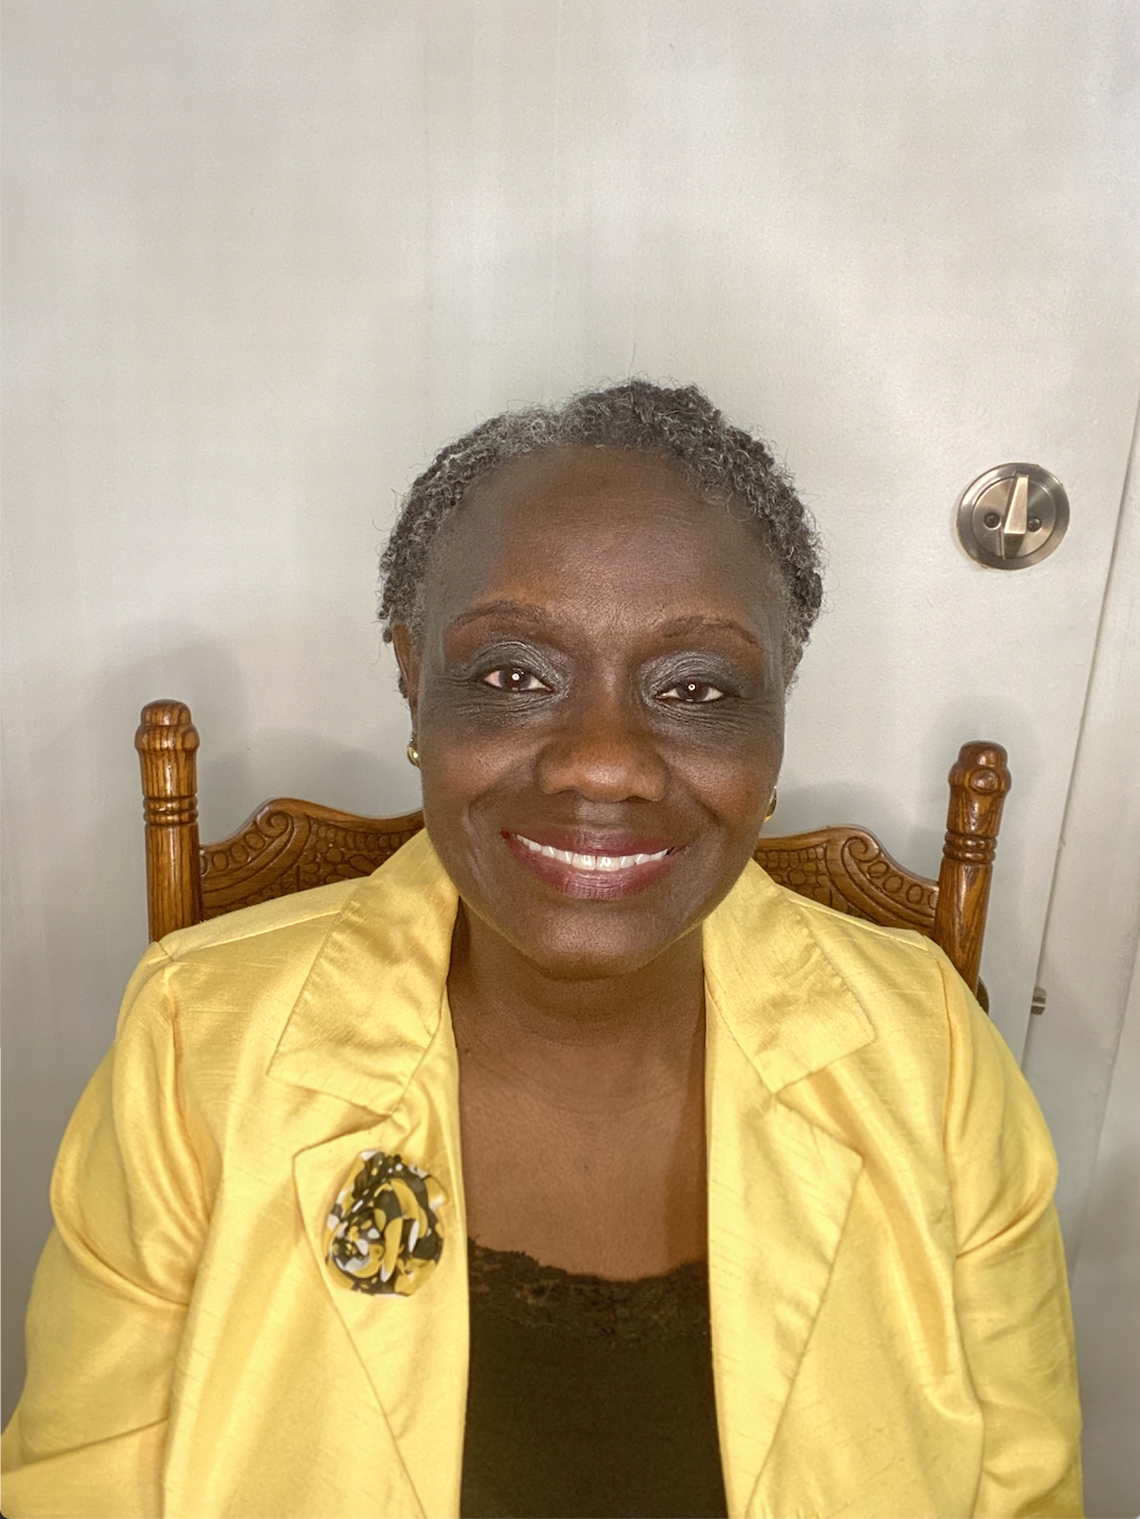 Johnnie Mae Speach-Lemon is an incumbent candidate for Batesburg-Leesville town council in the 2023 election. Provided by Johnnie Mae Speech Lemon